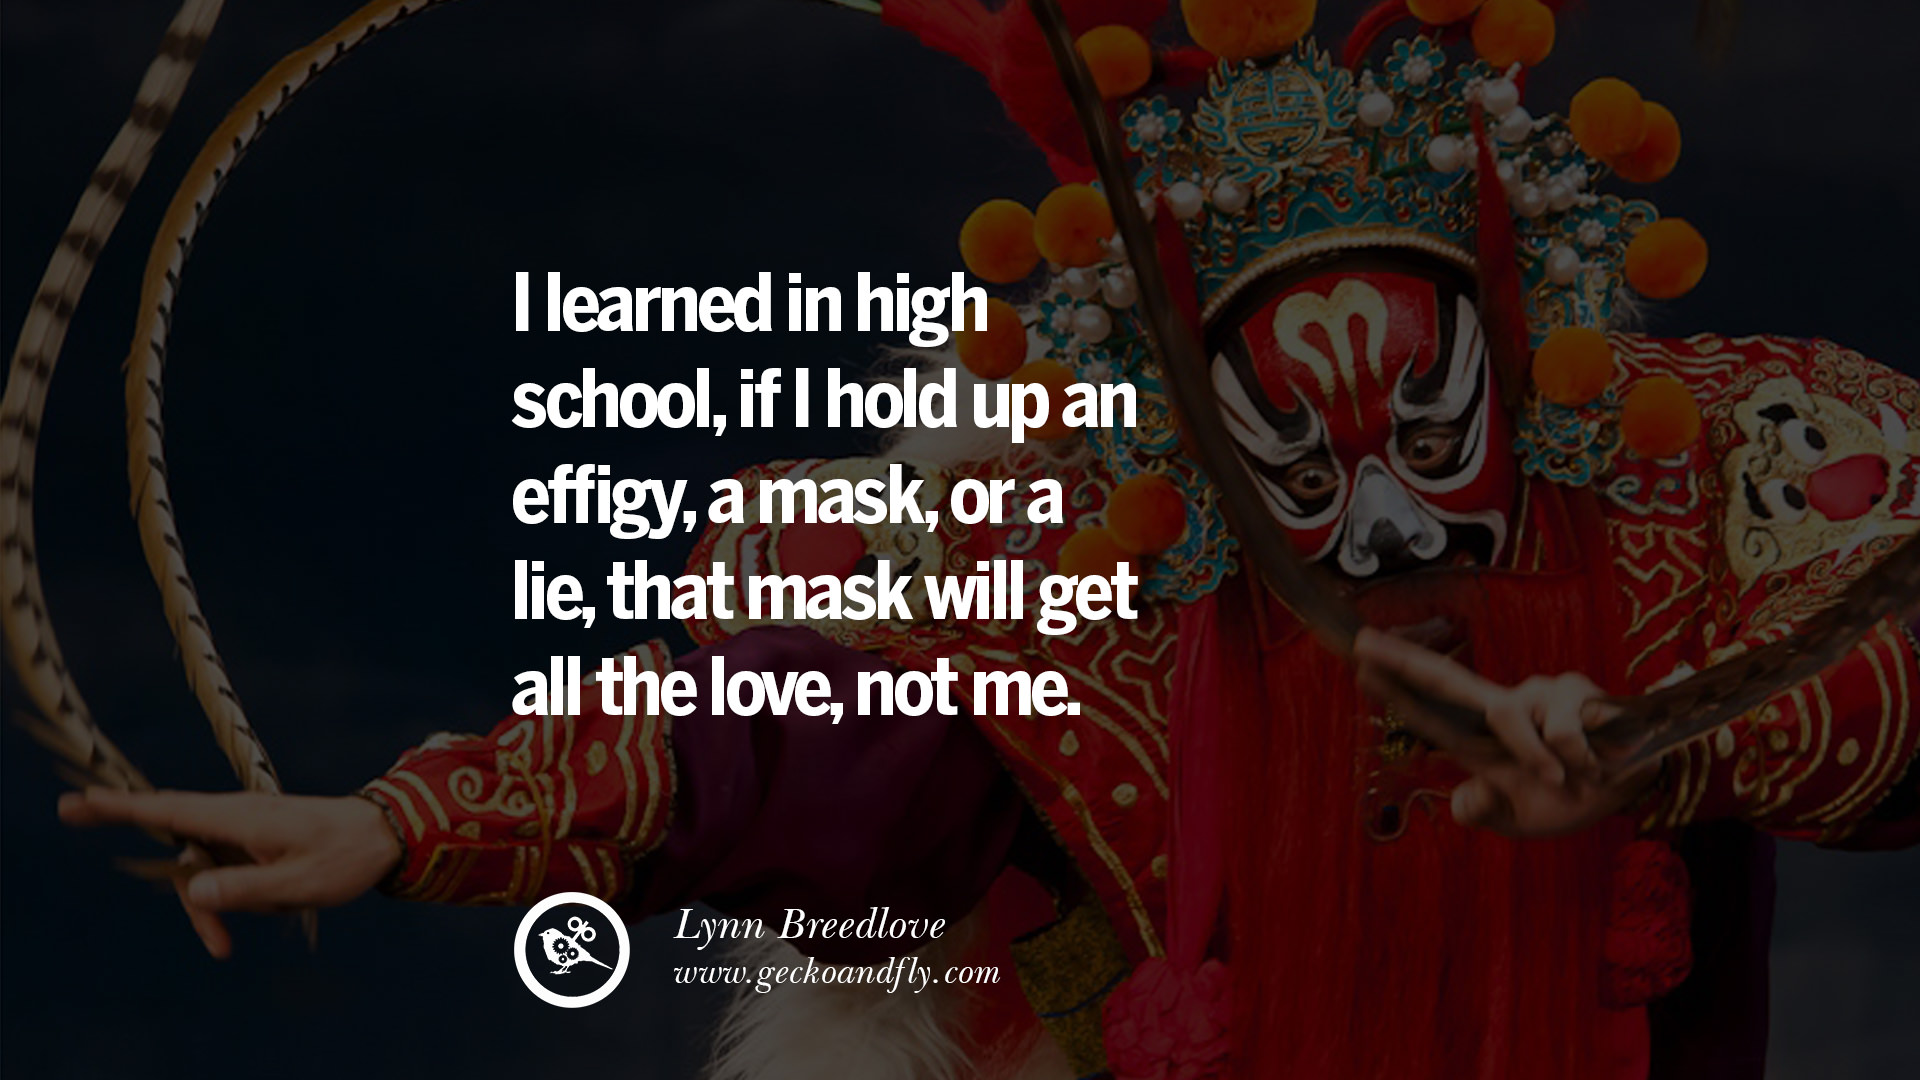 I learned in high school if I hold up an effigy a mask